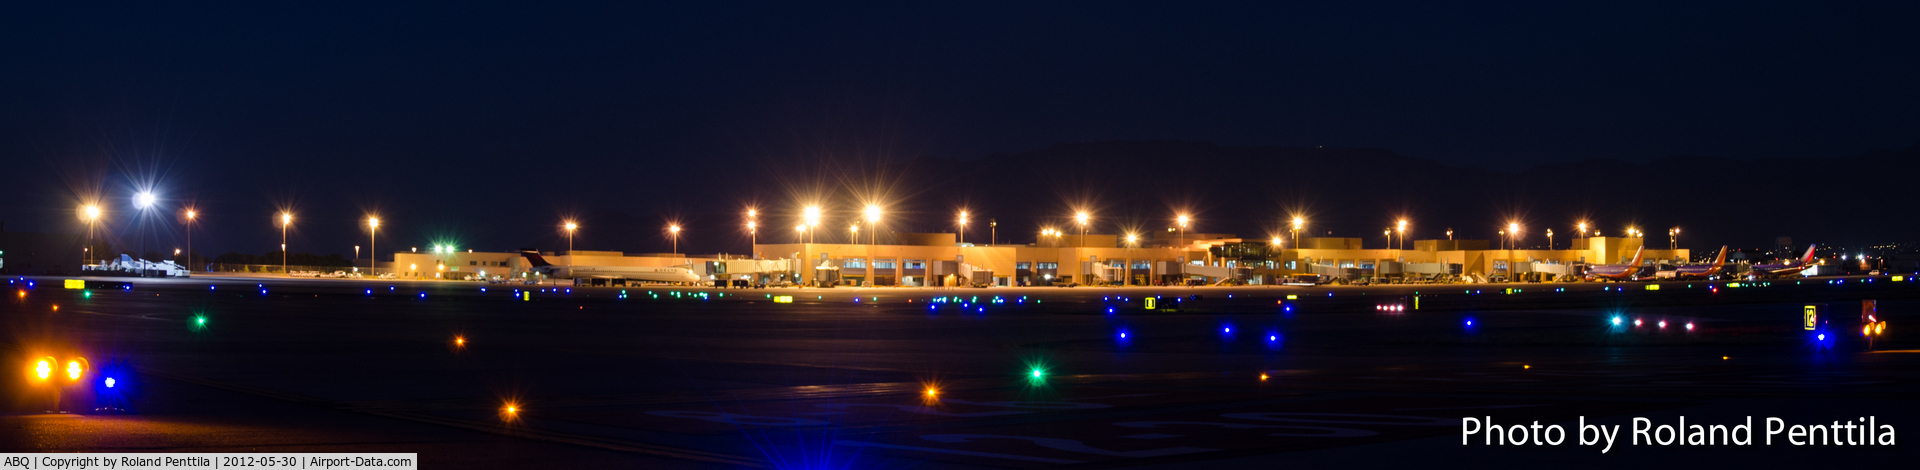 Albuquerque International Sunport Airport (ABQ) - Albuquerque's International Terminal (Sunport) at night from the runway side.